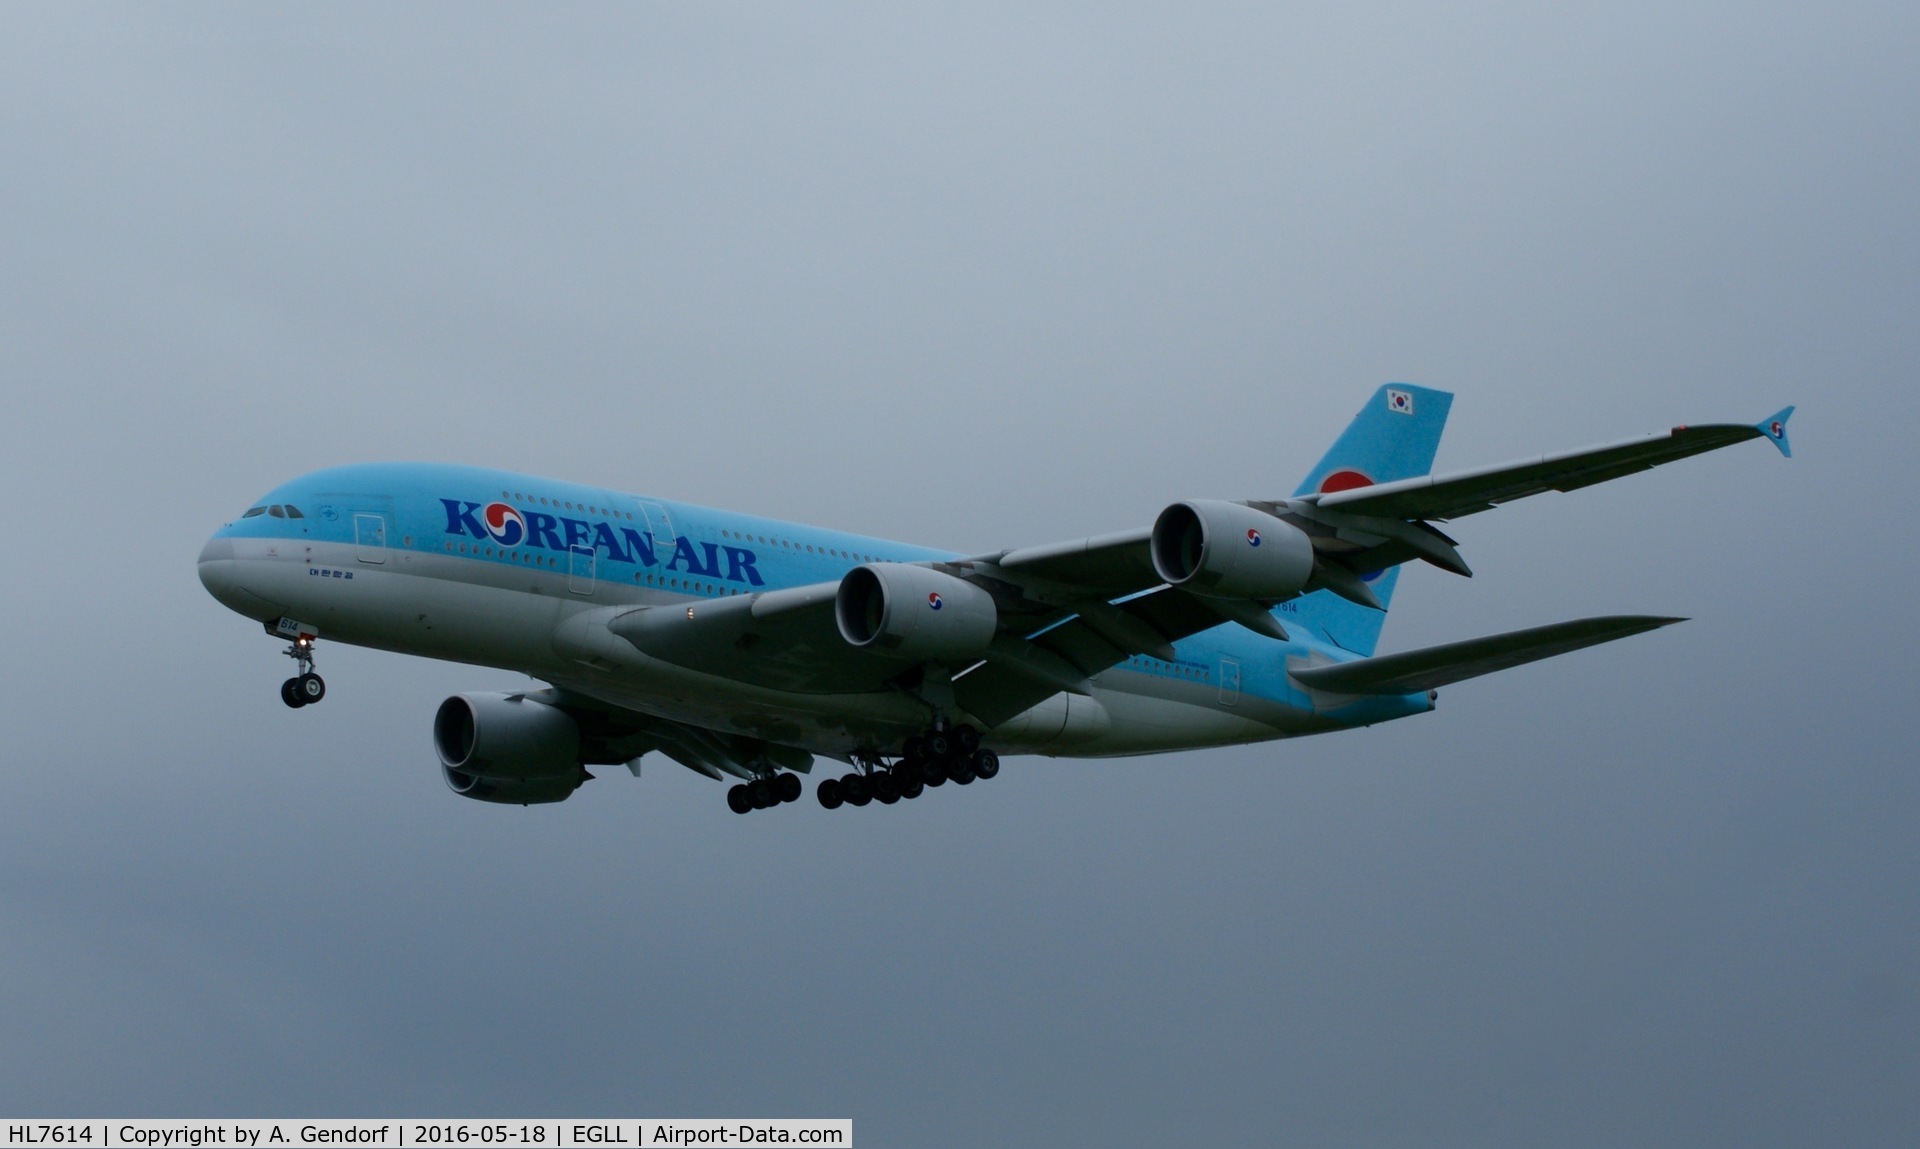 HL7614, 2011 Airbus A380-861 C/N 068, Korean Air, is here completing the flight from Seoul(RKSI) to London Heathrow(EGLL)